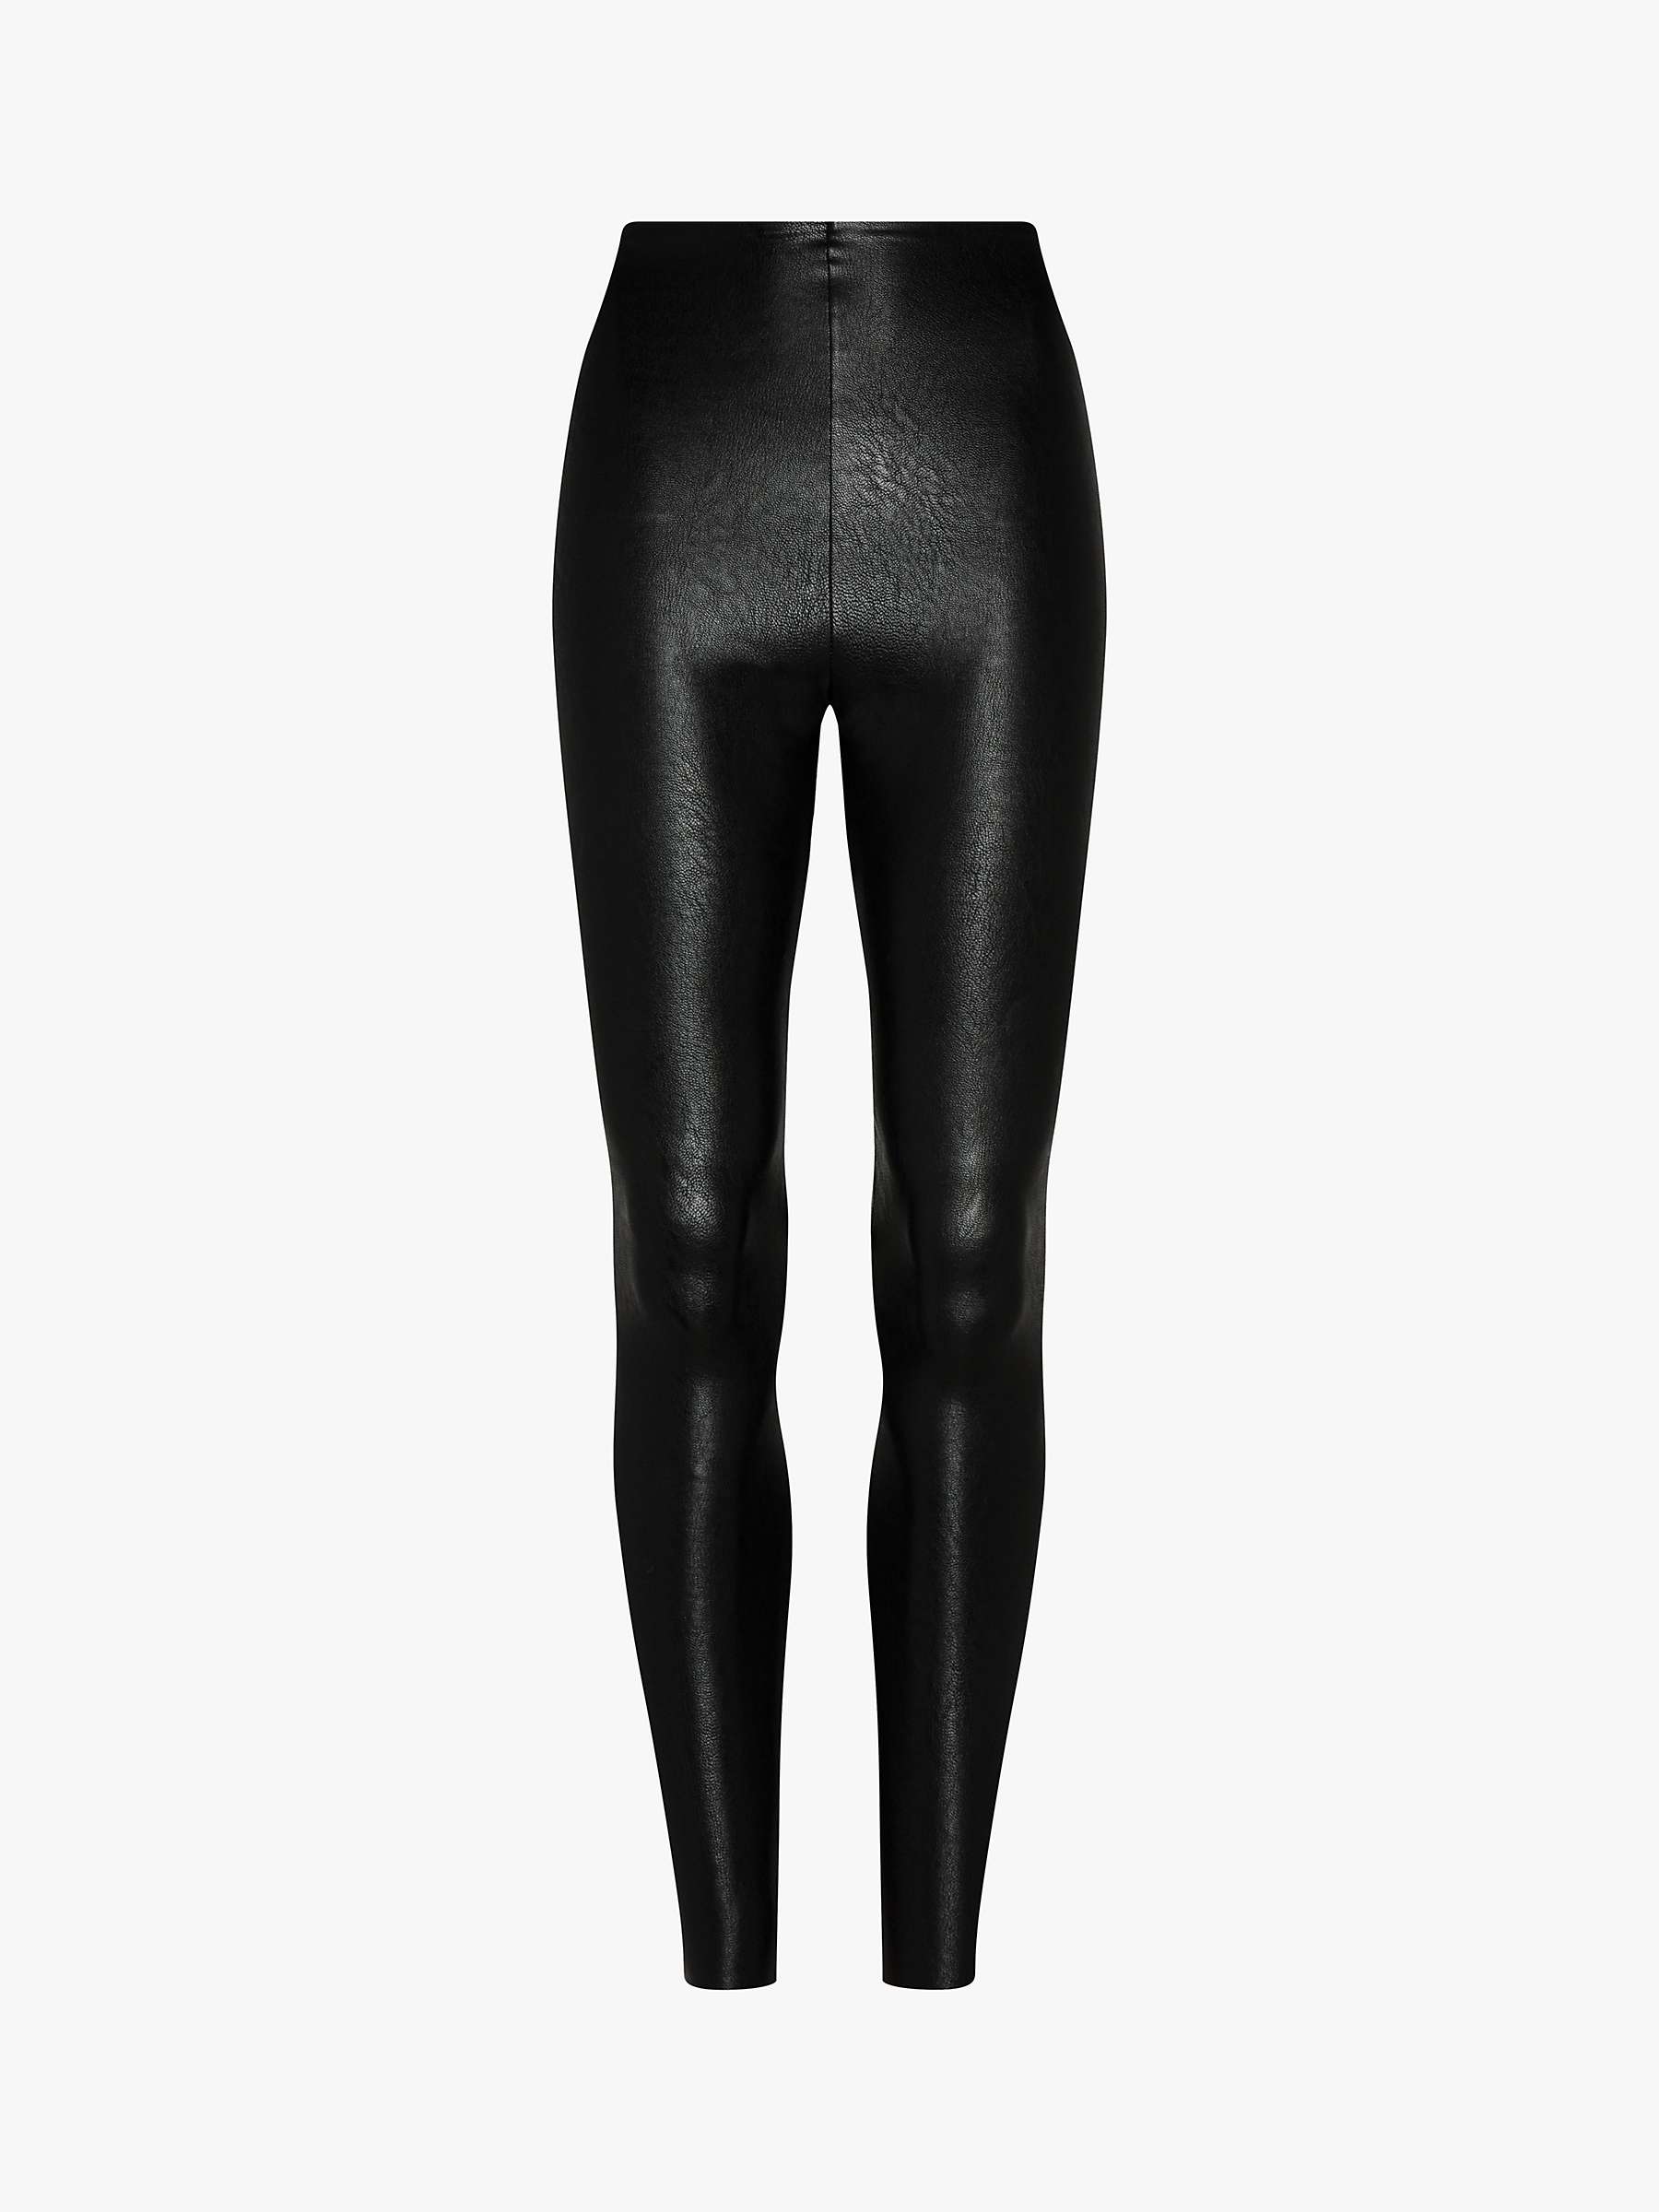 Buy Commando 7/8 Faux Leather Smoothing Leggings, Black Online at johnlewis.com